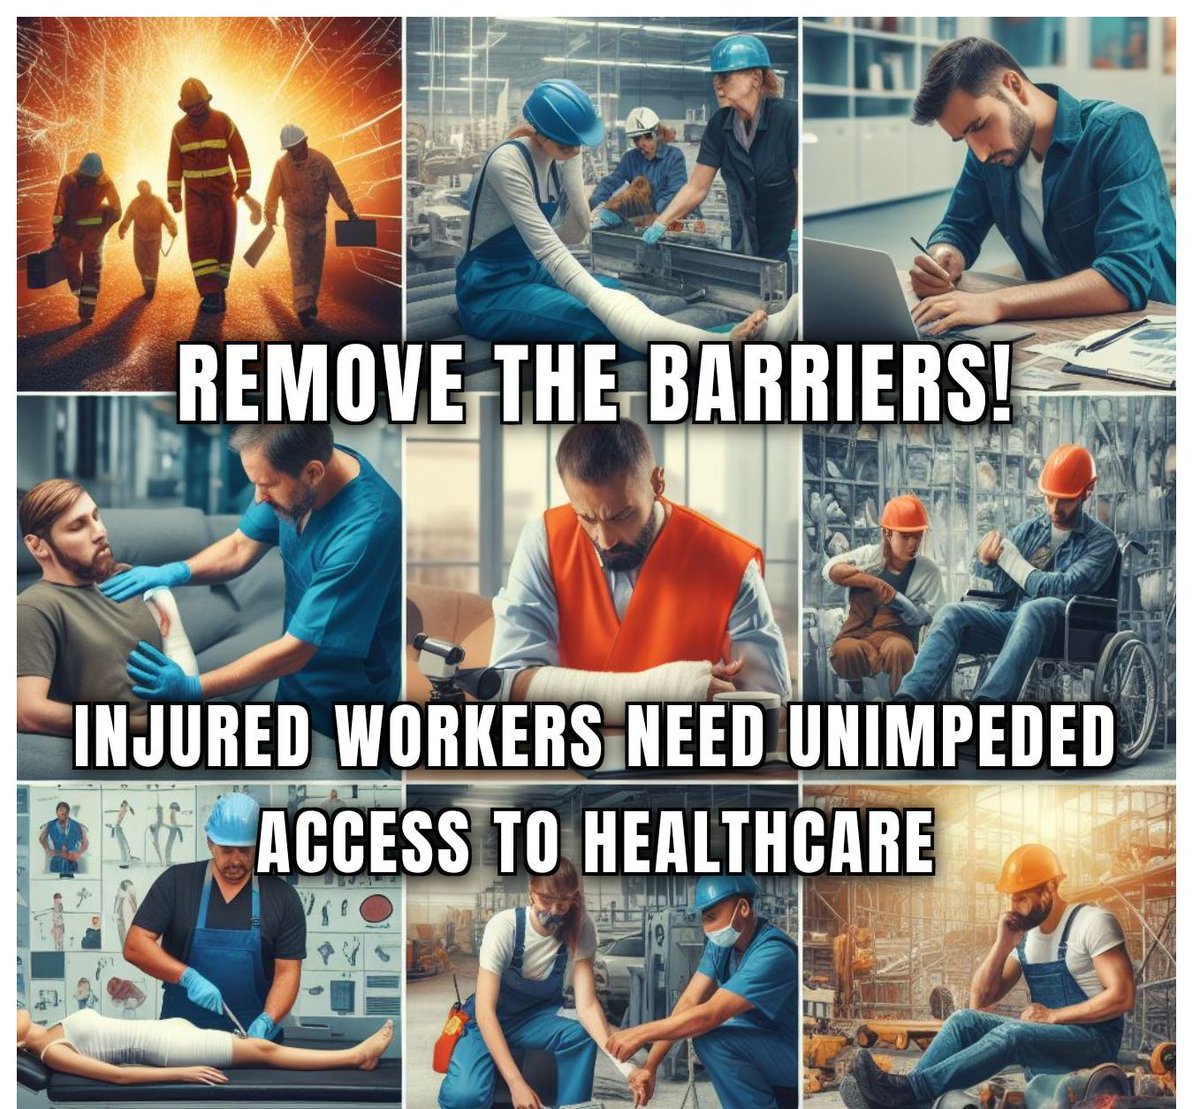 Remove the barriers! #InjuredWorkers need unimpeded access to healthcare. Let's ensure they get the support they deserve! #HealthcareForAll #wsib #wcb #workera #canada #workerscomp